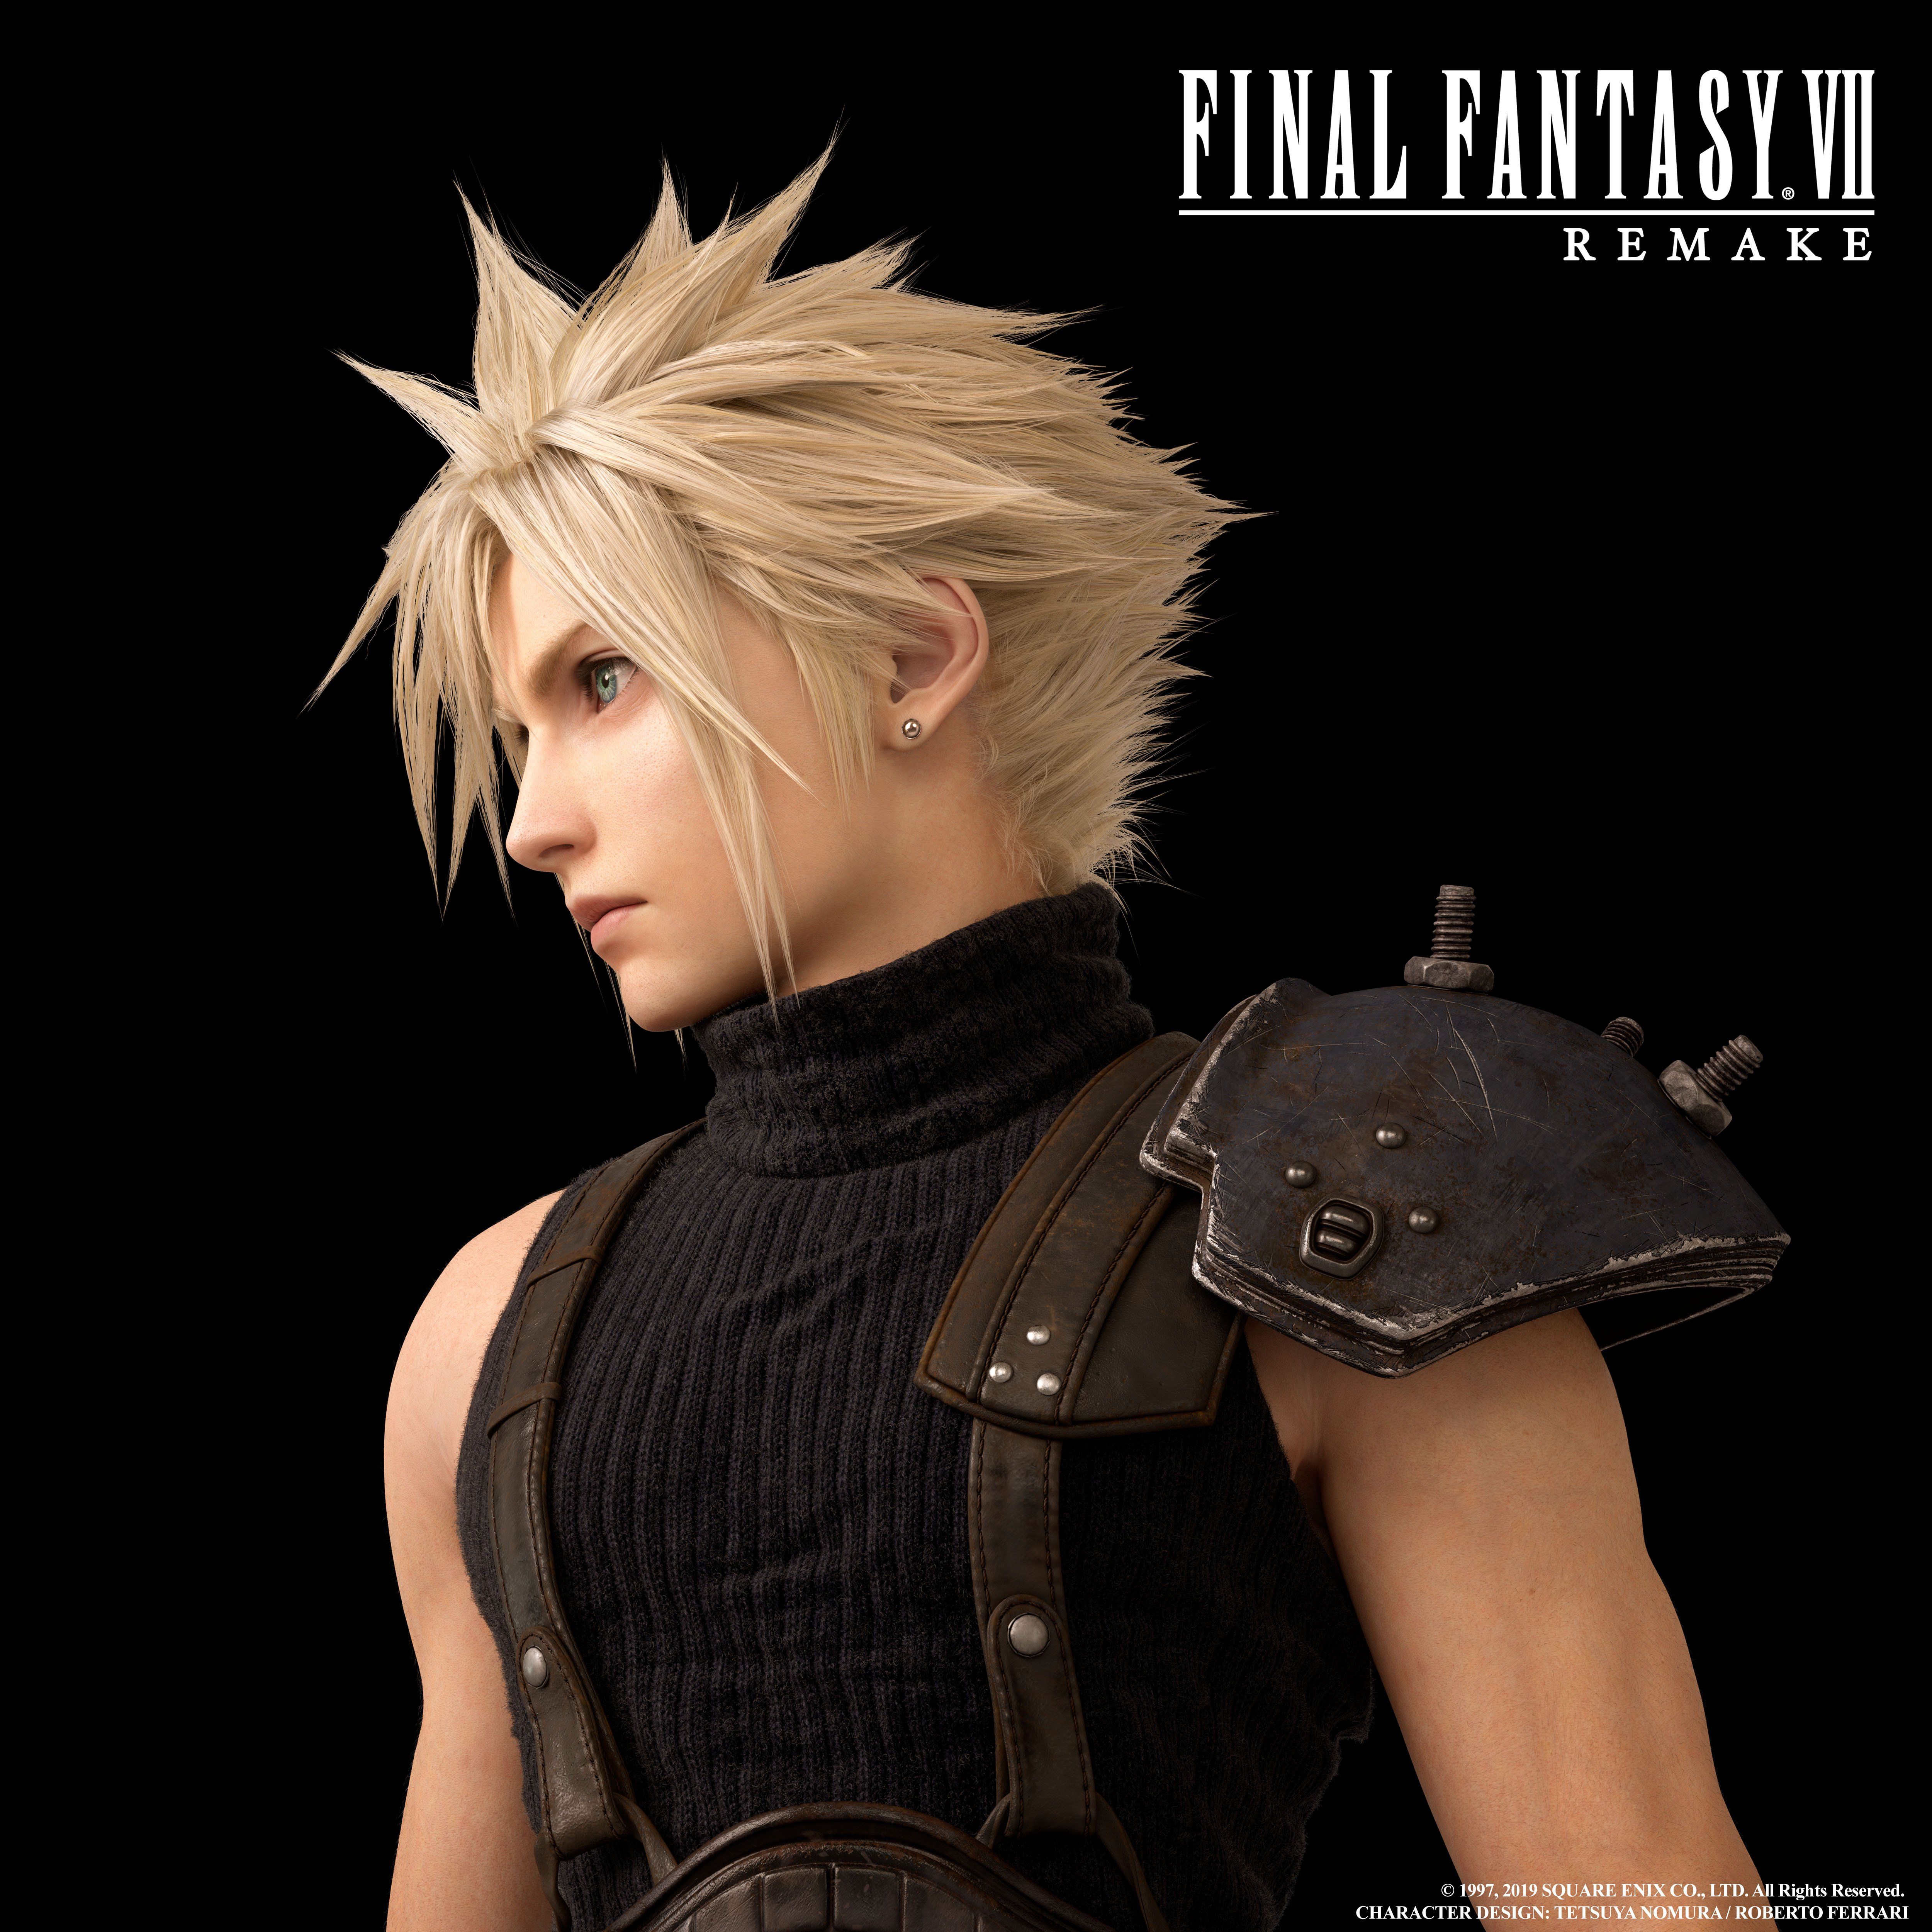 Gallery: All Final Fantasy VII Remake Character Art